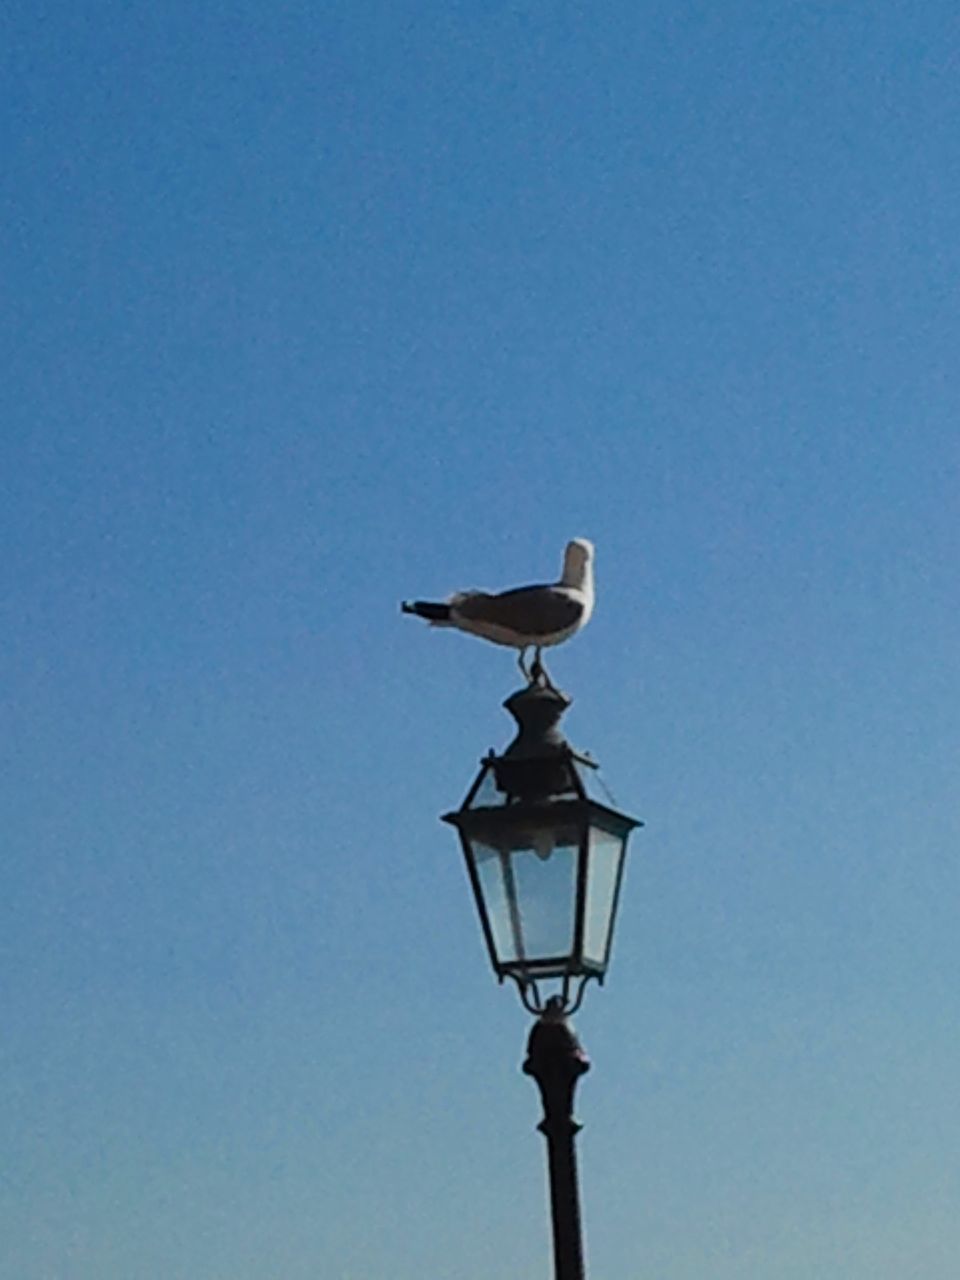 clear sky, bird, low angle view, copy space, animal themes, flying, blue, animals in the wild, wildlife, one animal, mid-air, street light, spread wings, perching, seagull, lighting equipment, day, outdoors, no people, nature